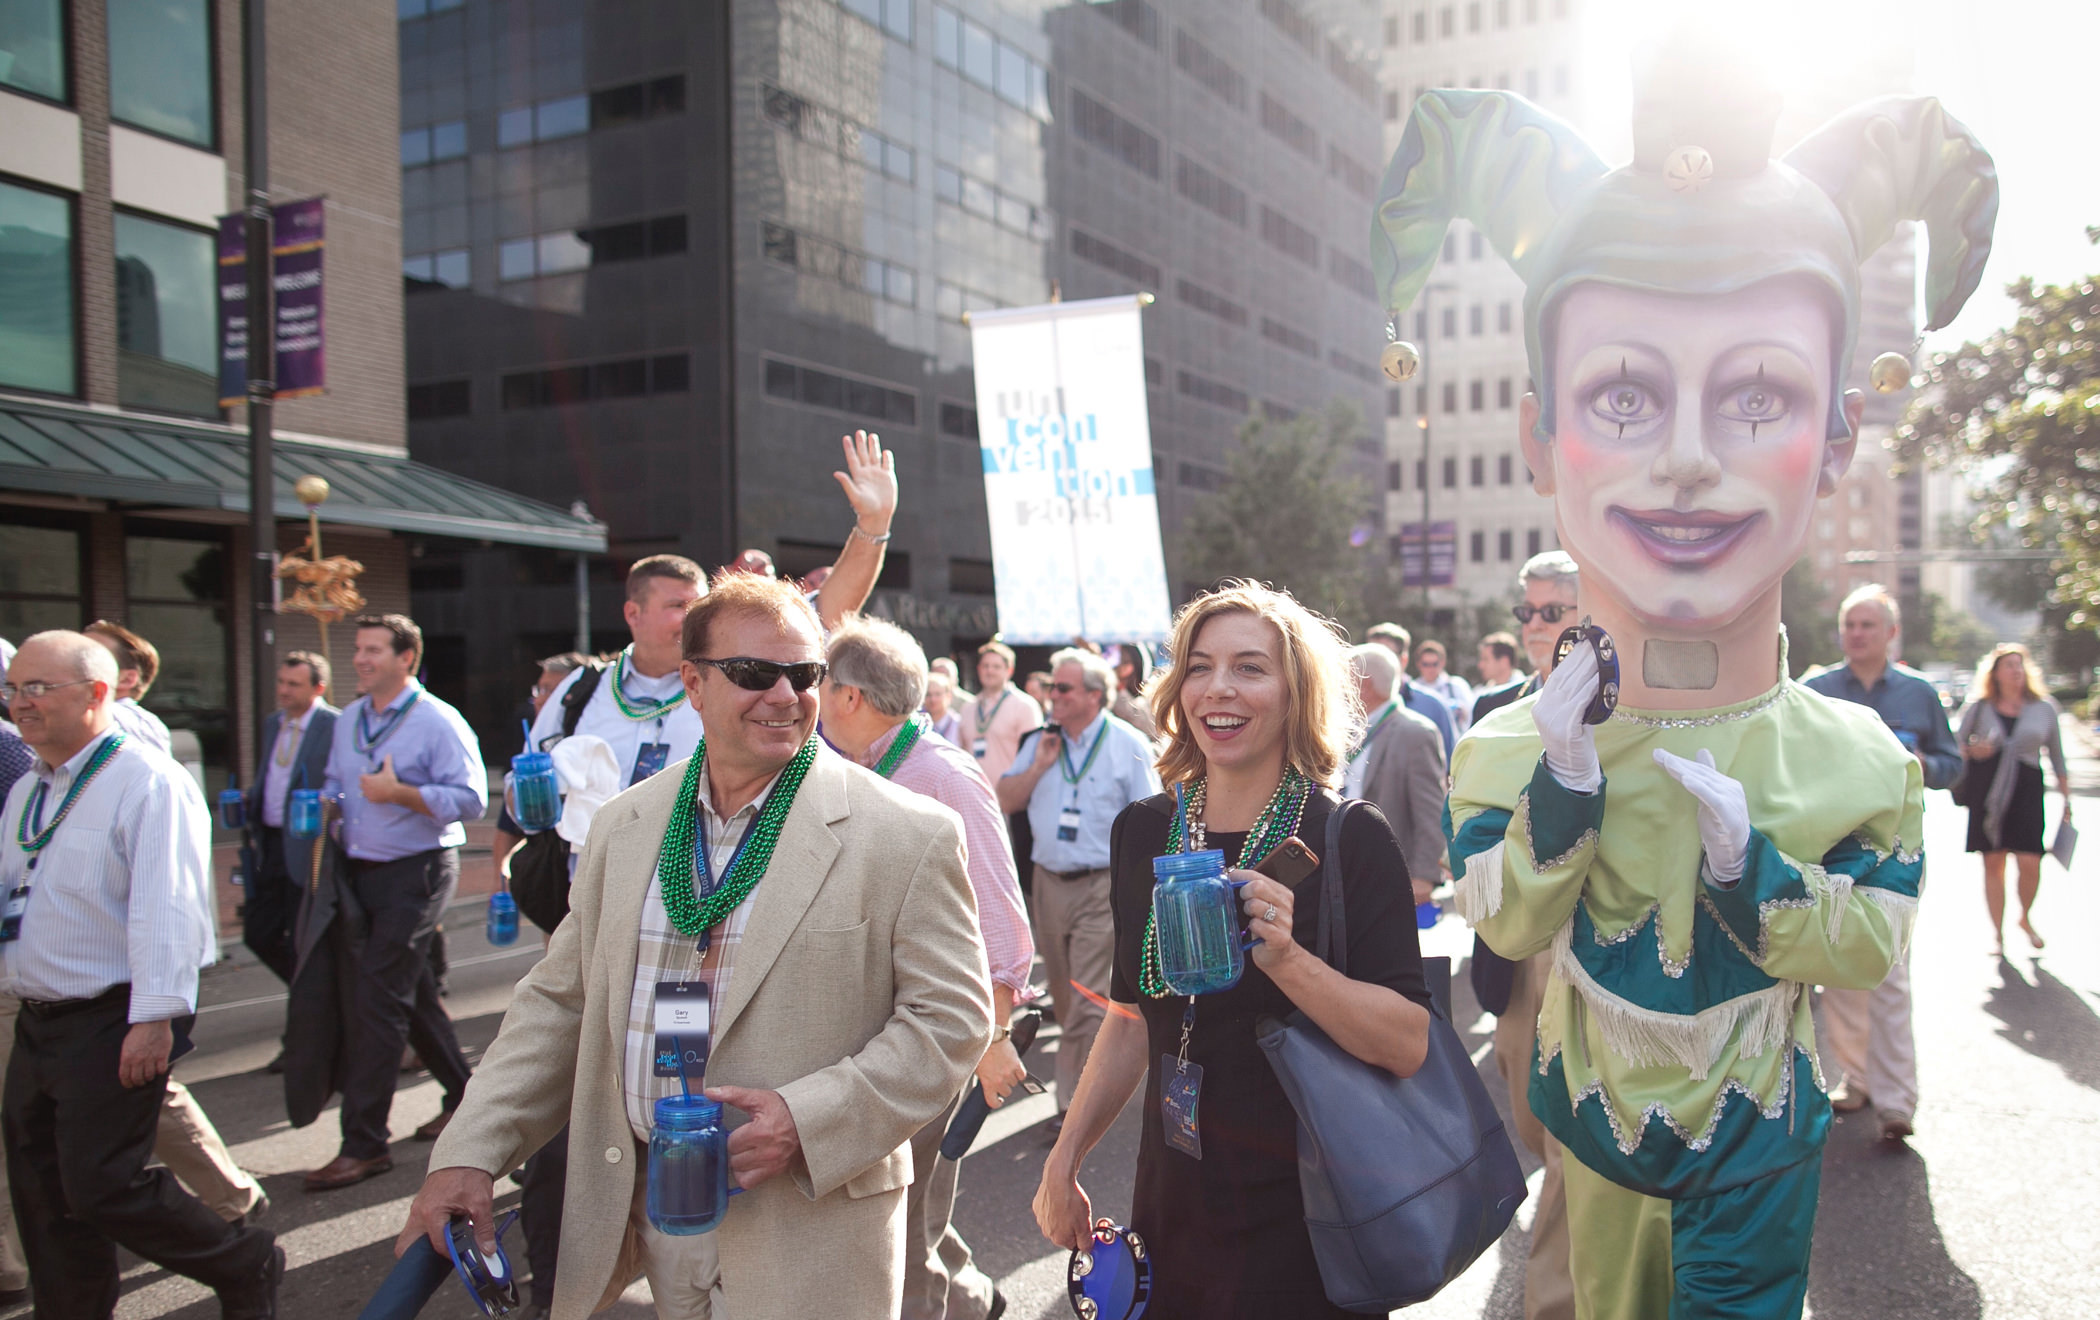 2015 KCG Uncon client event attendees parade on a New Orleans street with a Mardi Gras-style puppet figure. 